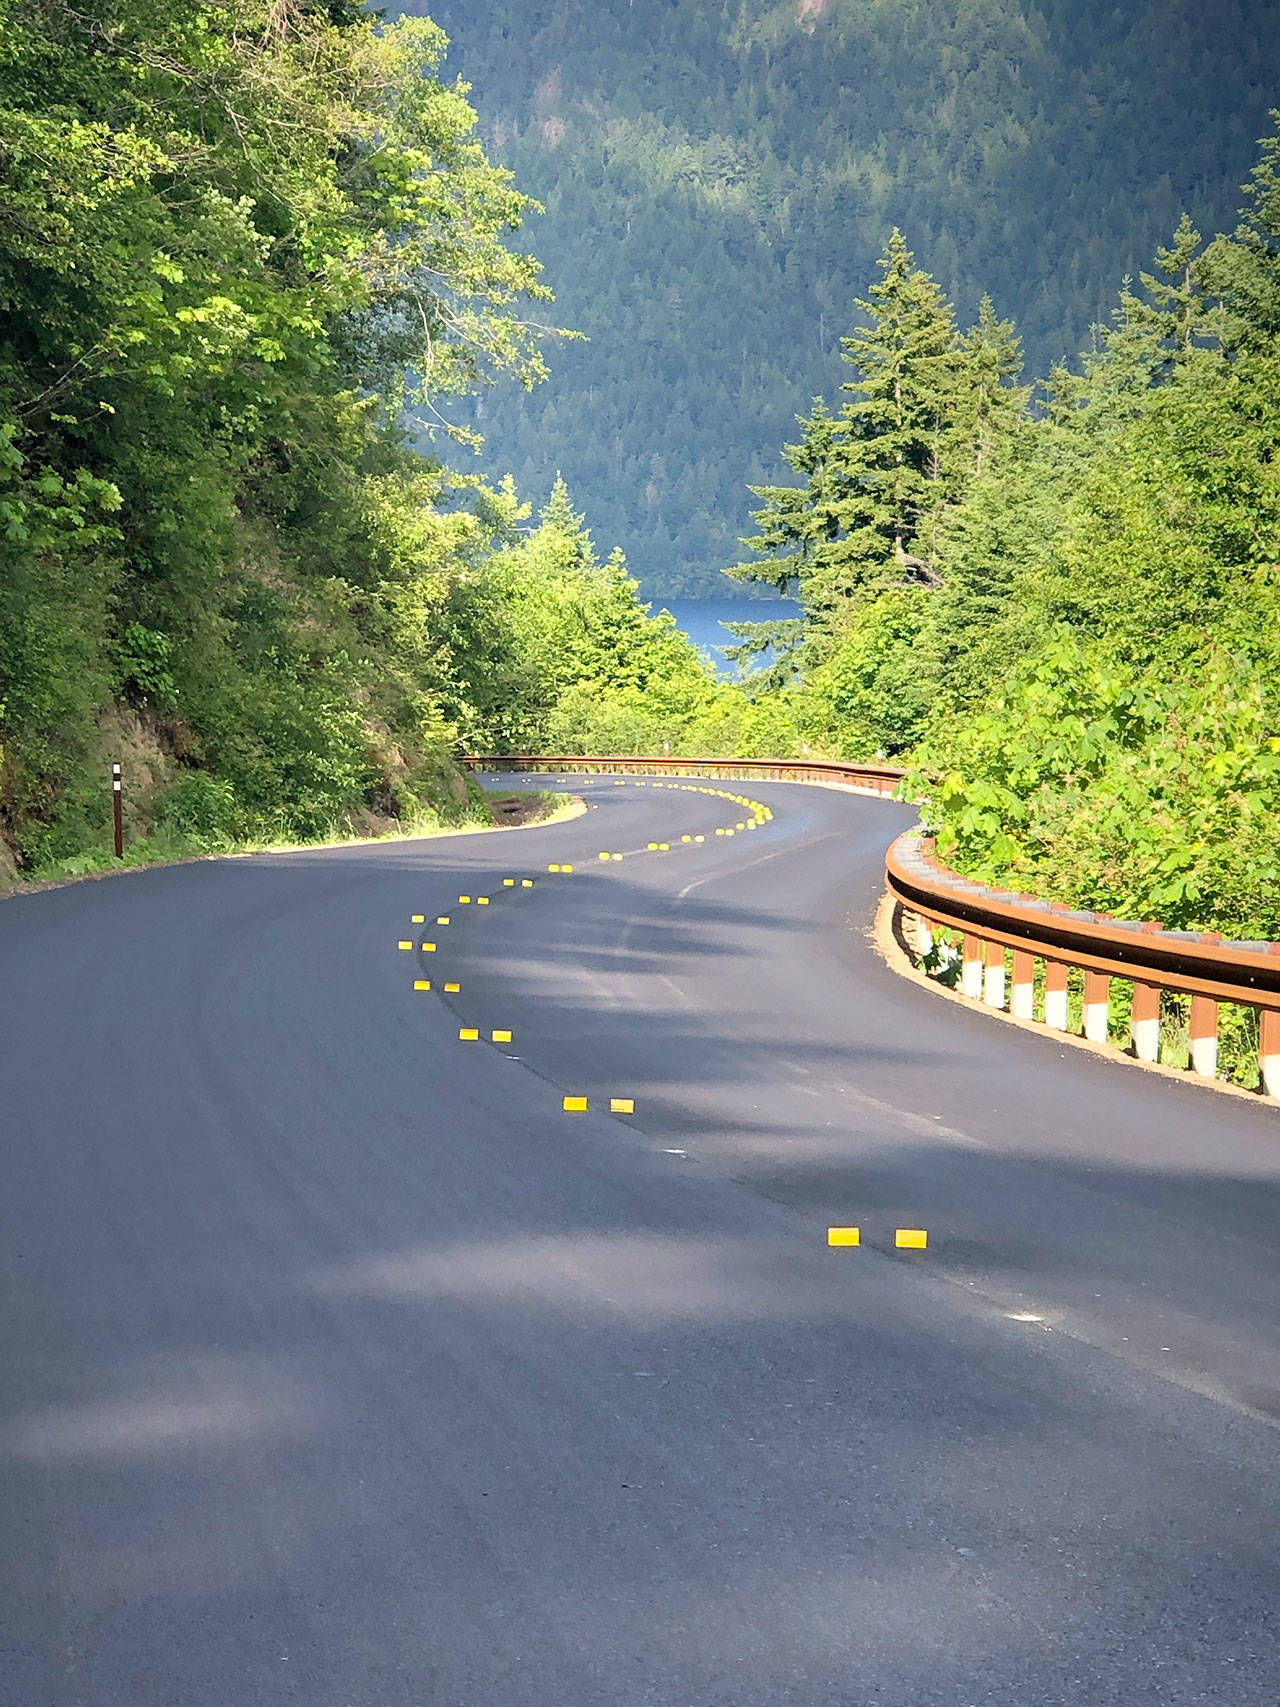 Freshly-paved roadway is seen now on U.S. Highway 101 around Lake Crescent. (Olympic National Park)